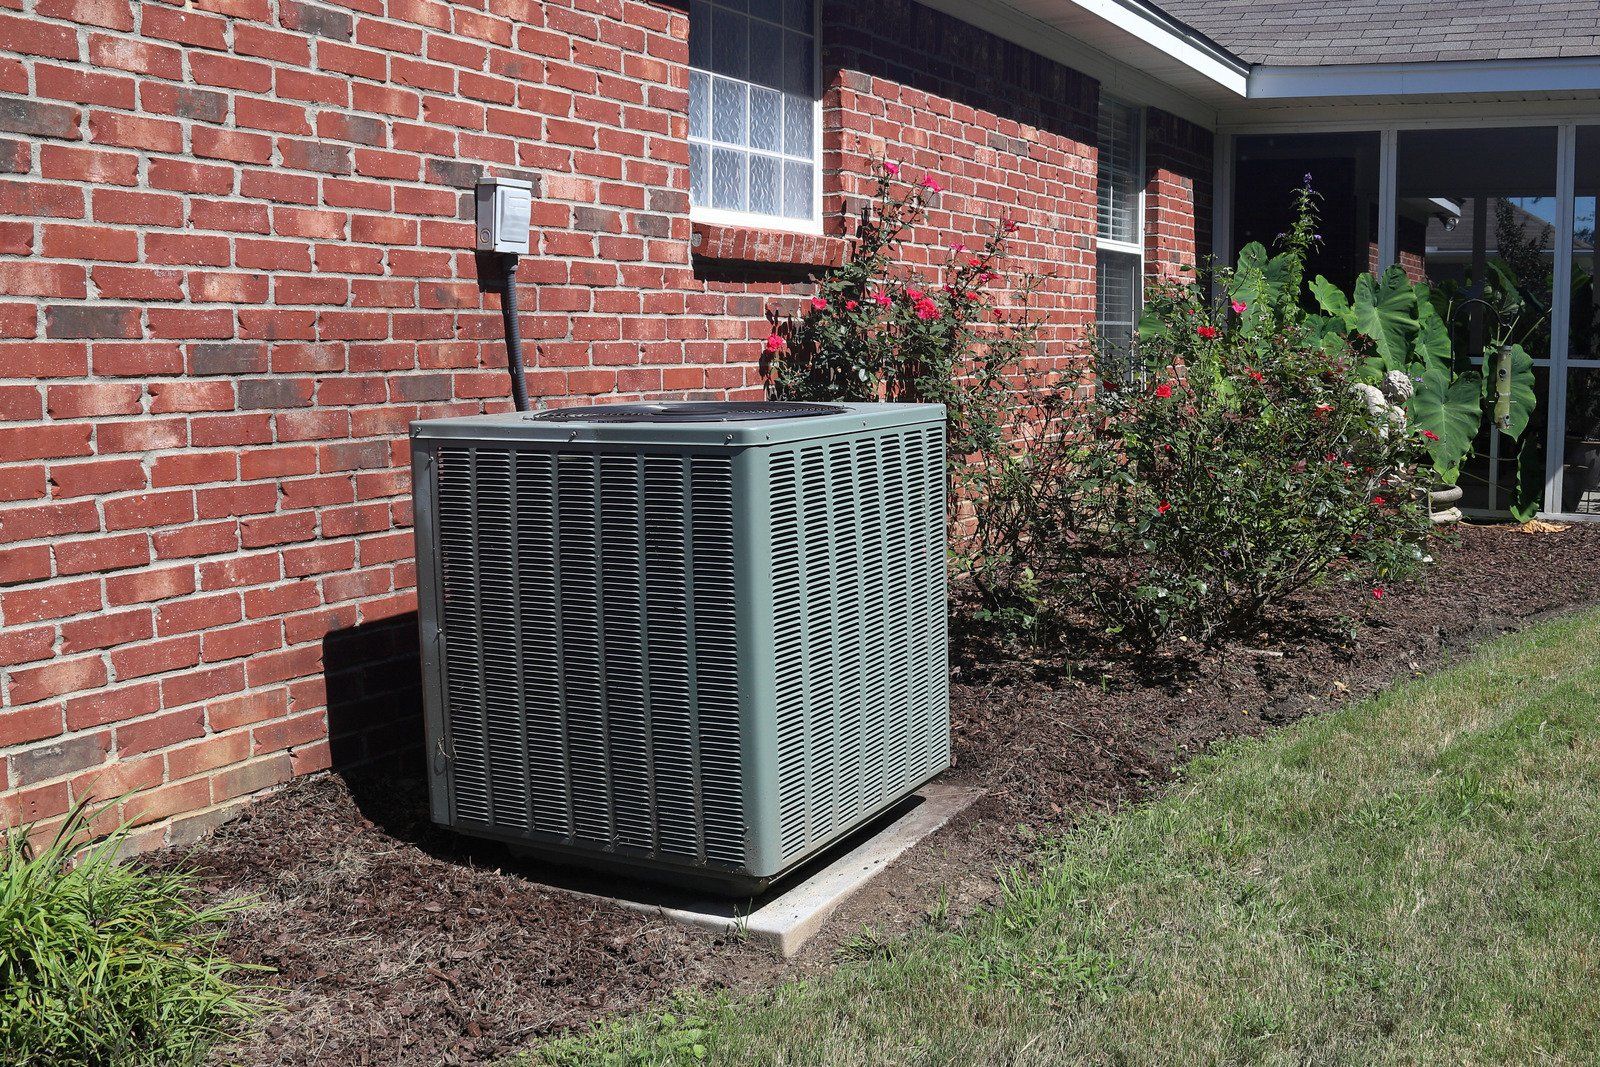 An air conditioner is sitting on the side of a brick house.